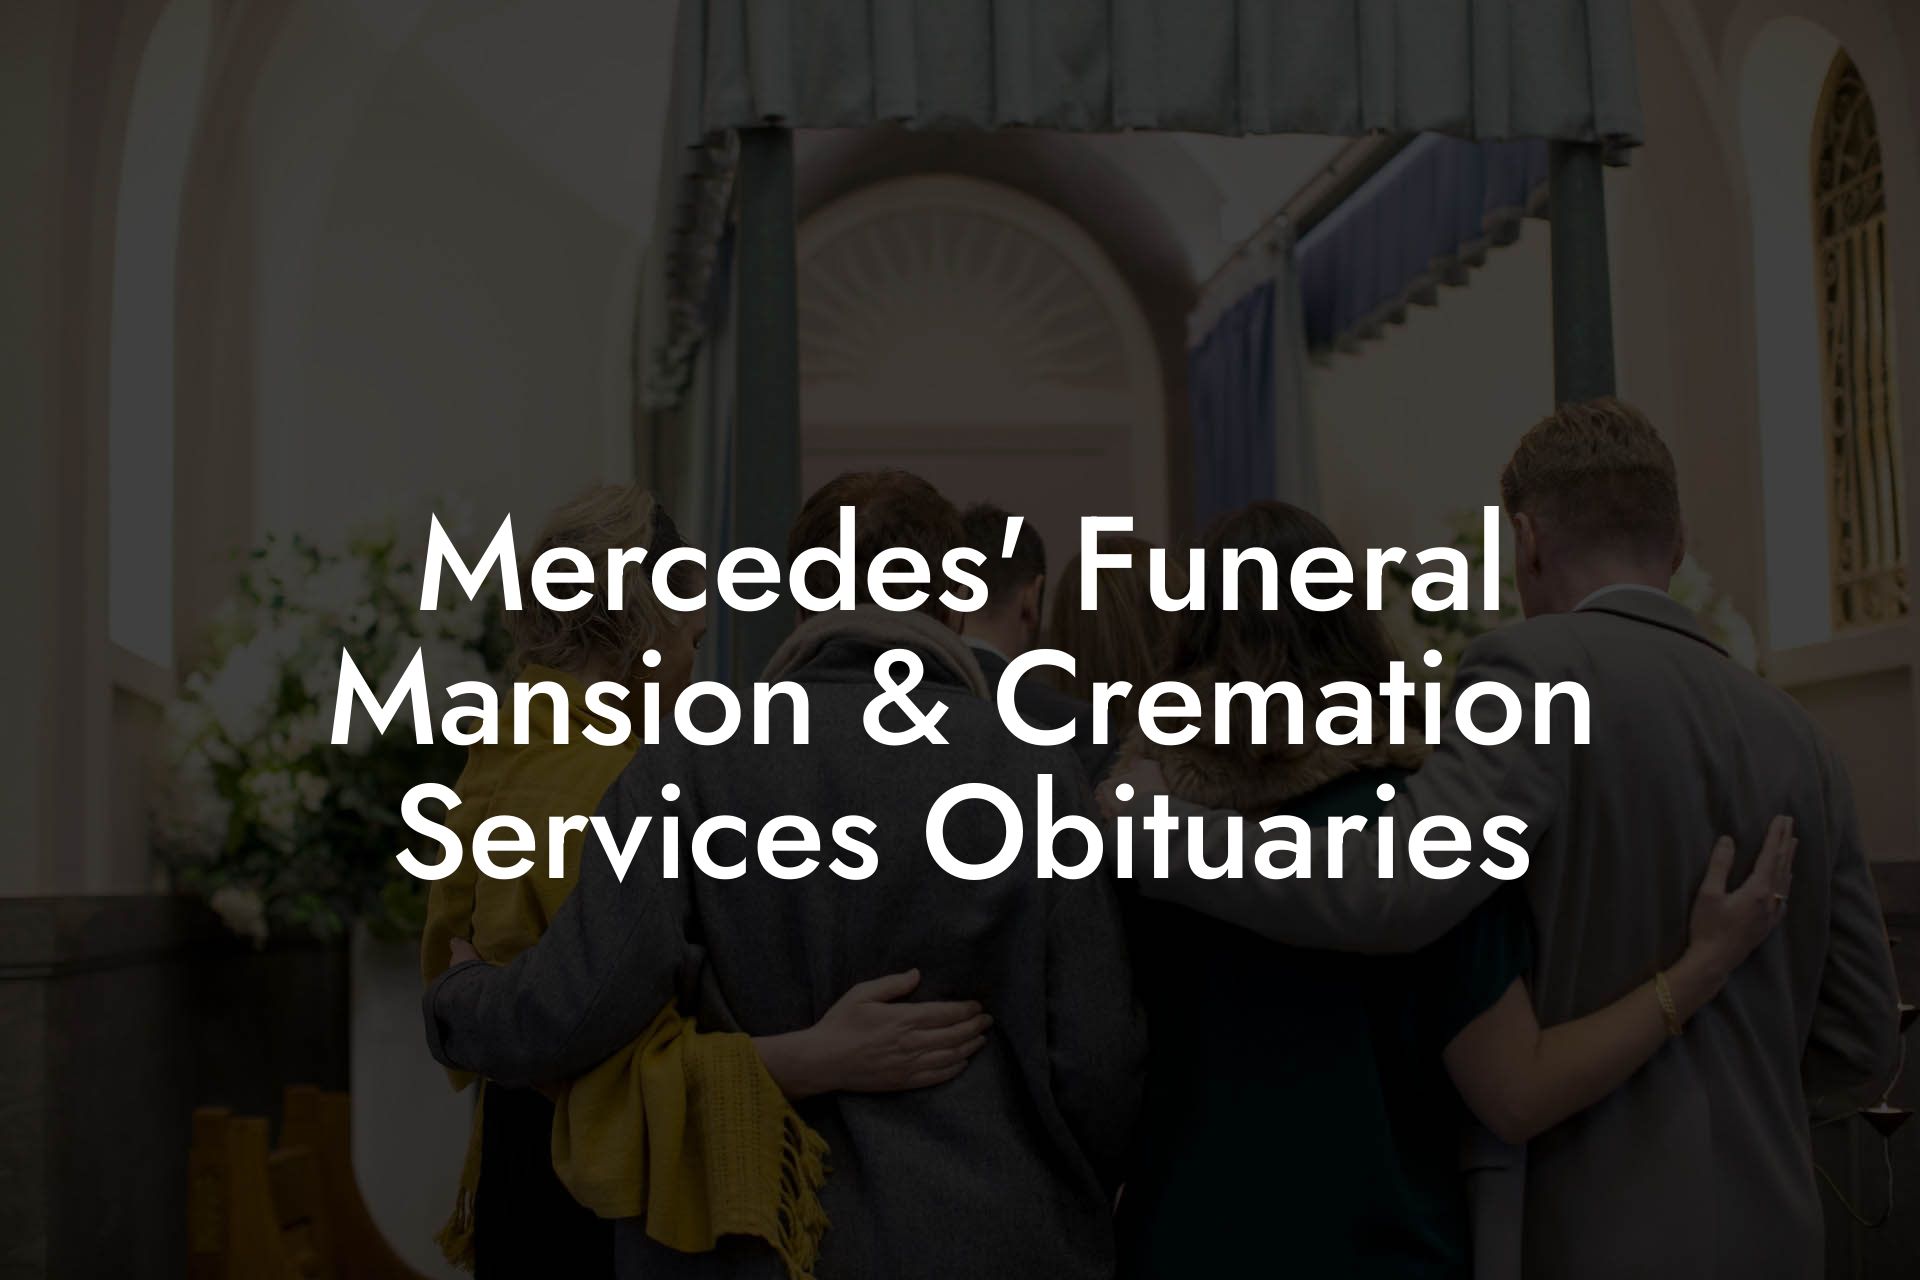 Mercedes' Funeral Mansion & Cremation Services Obituaries